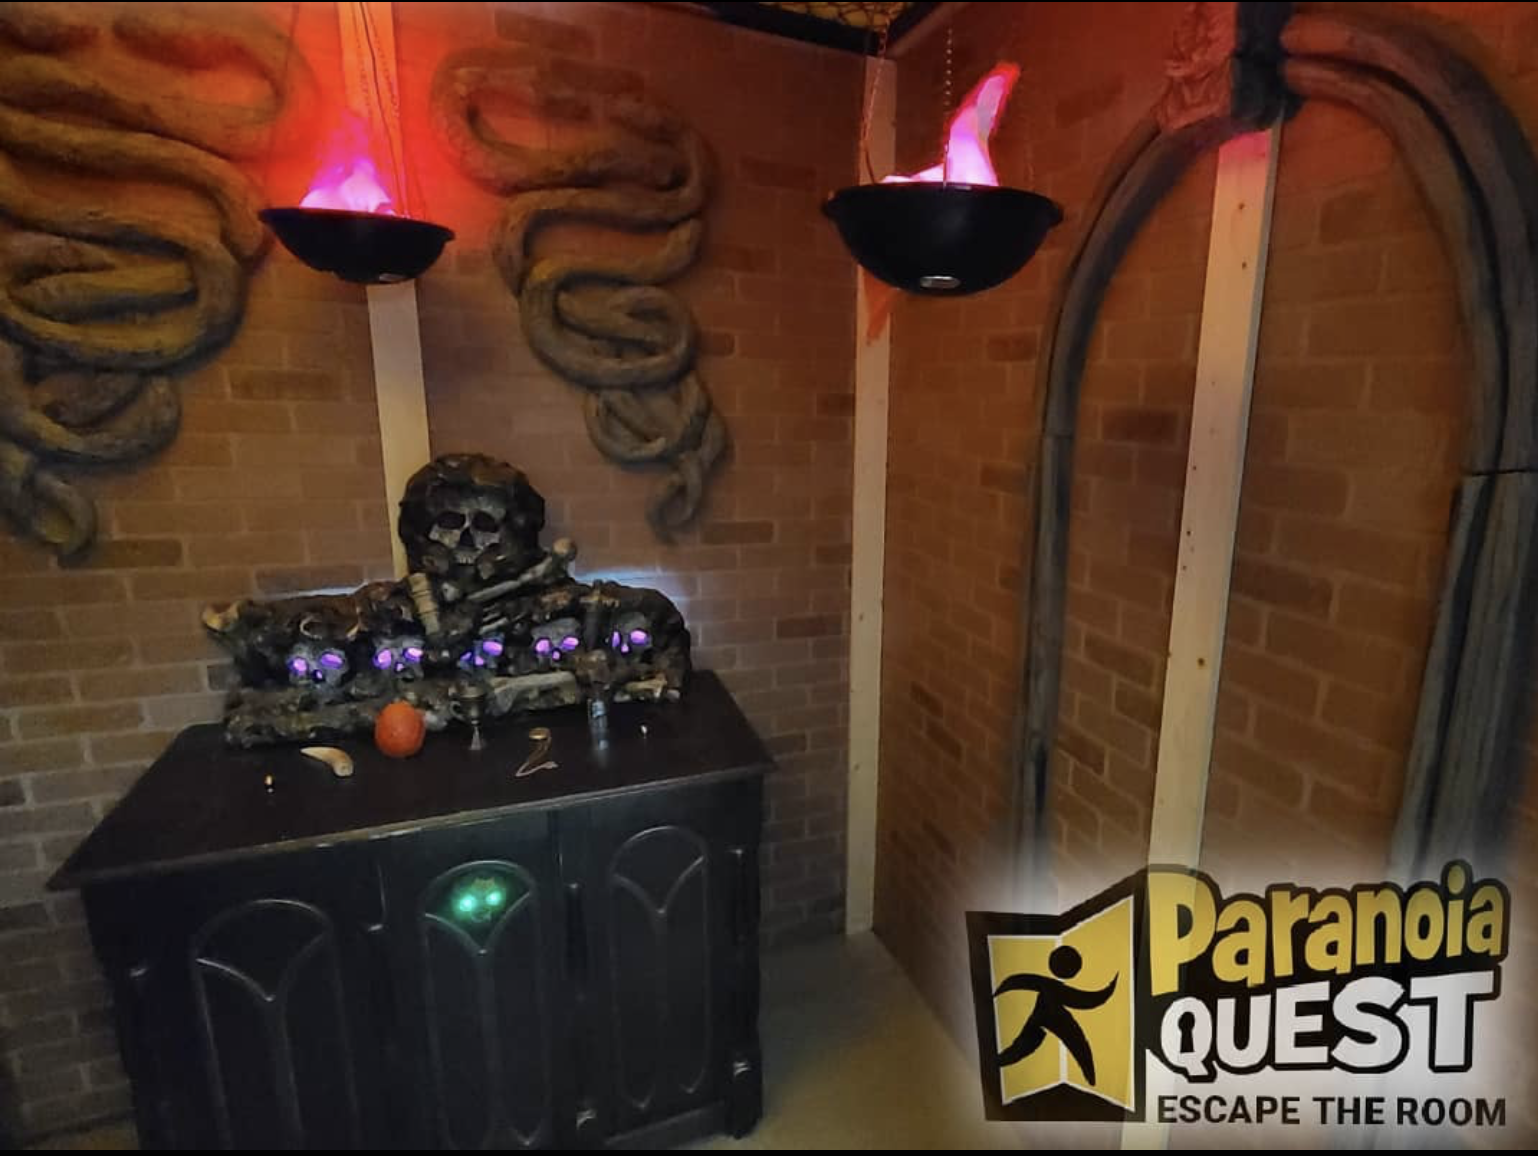 Paranoia Quest—The best escape room for kids in Atlanta